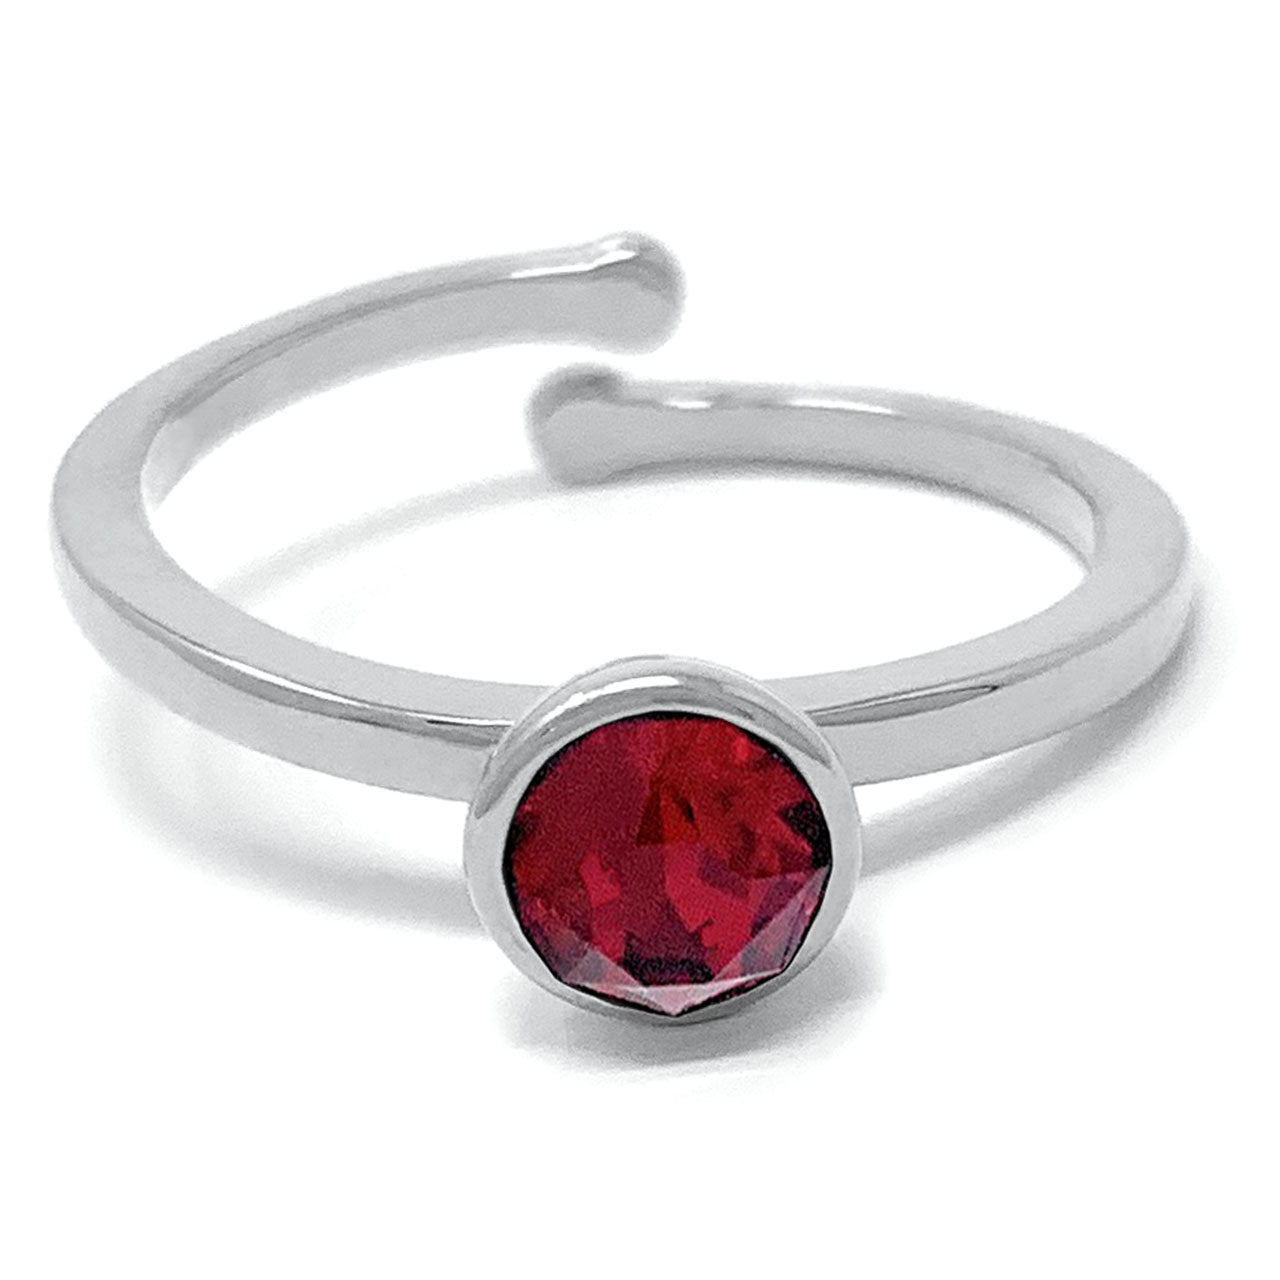 Harley Adjustable Ring with Red Siam Round Crystals from Swarovski Silver Toned Rhodium Plated - Ed Heart